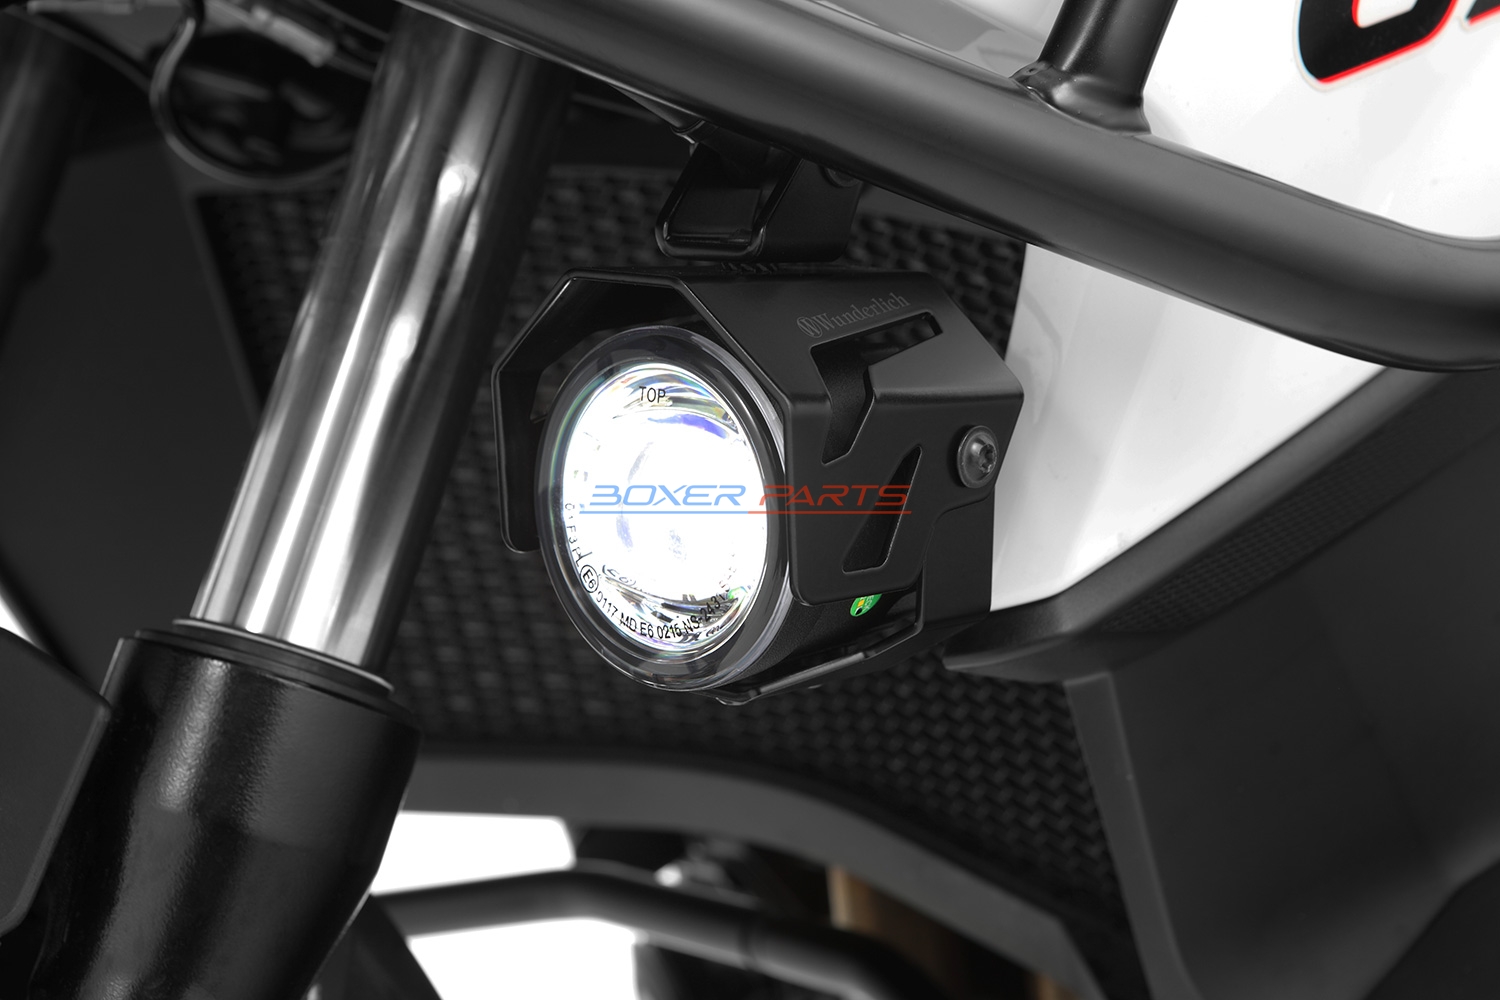 Wunderlich »ATON« LED auxiliary headlights